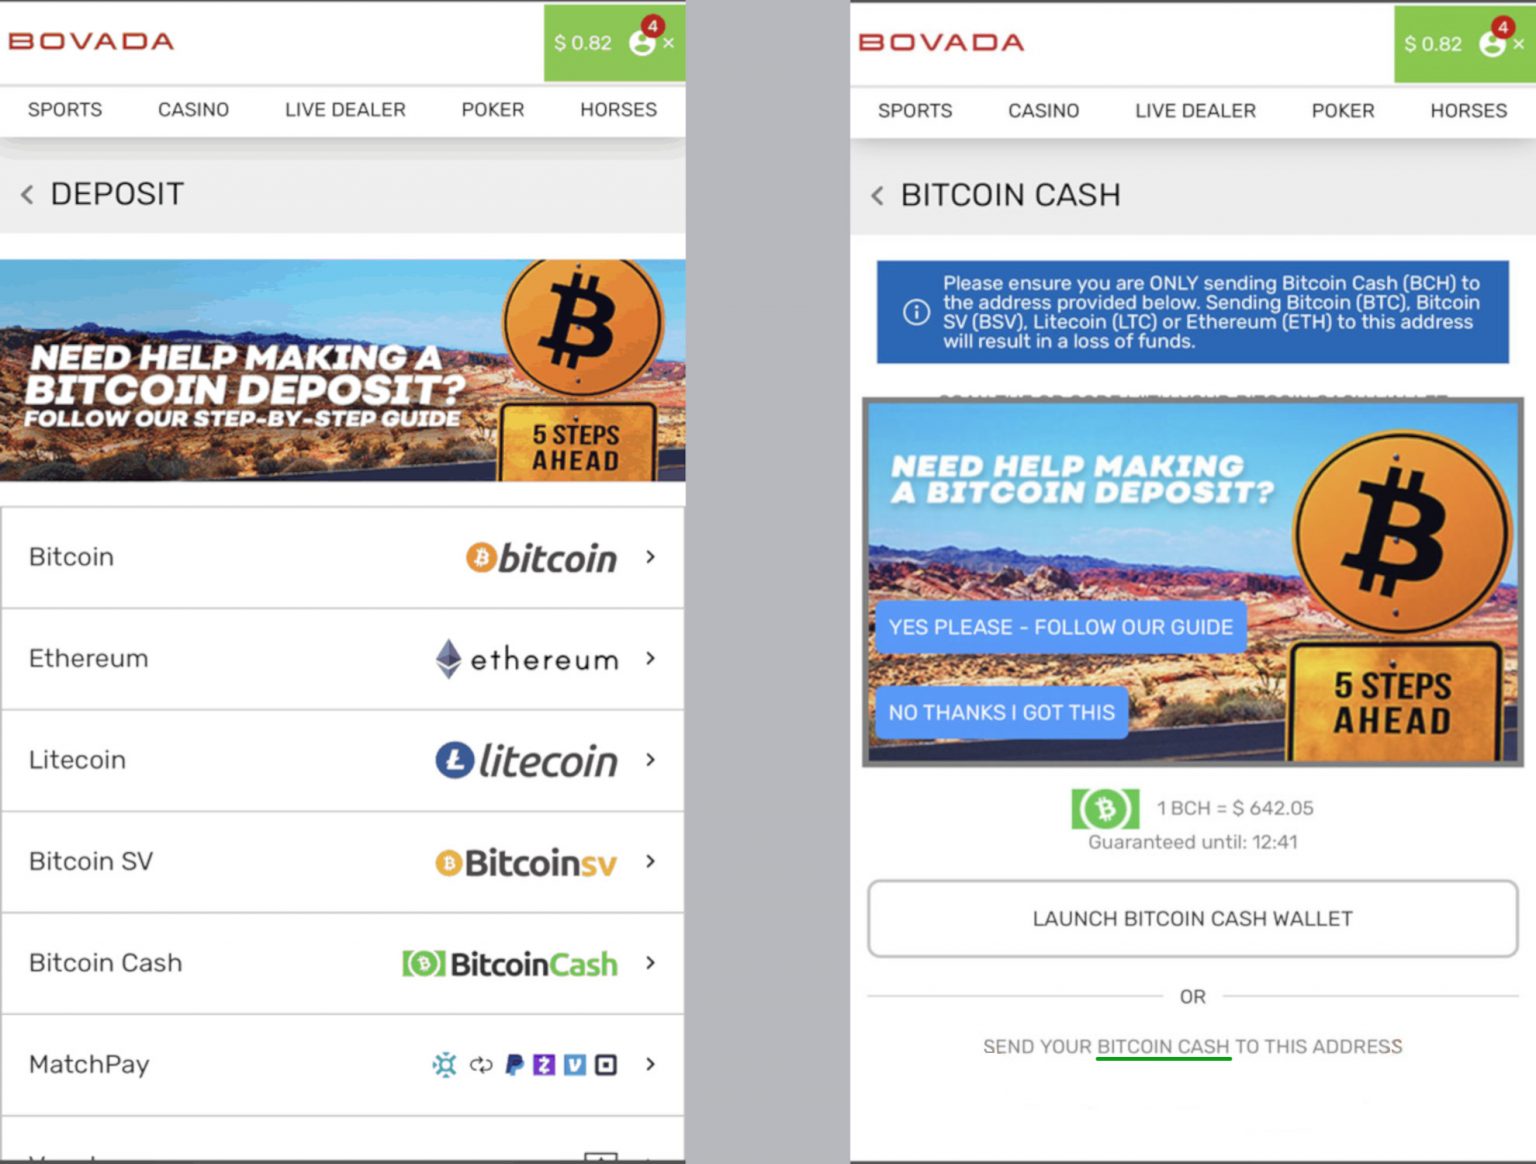 how to buy bitcoin for bovada reddit